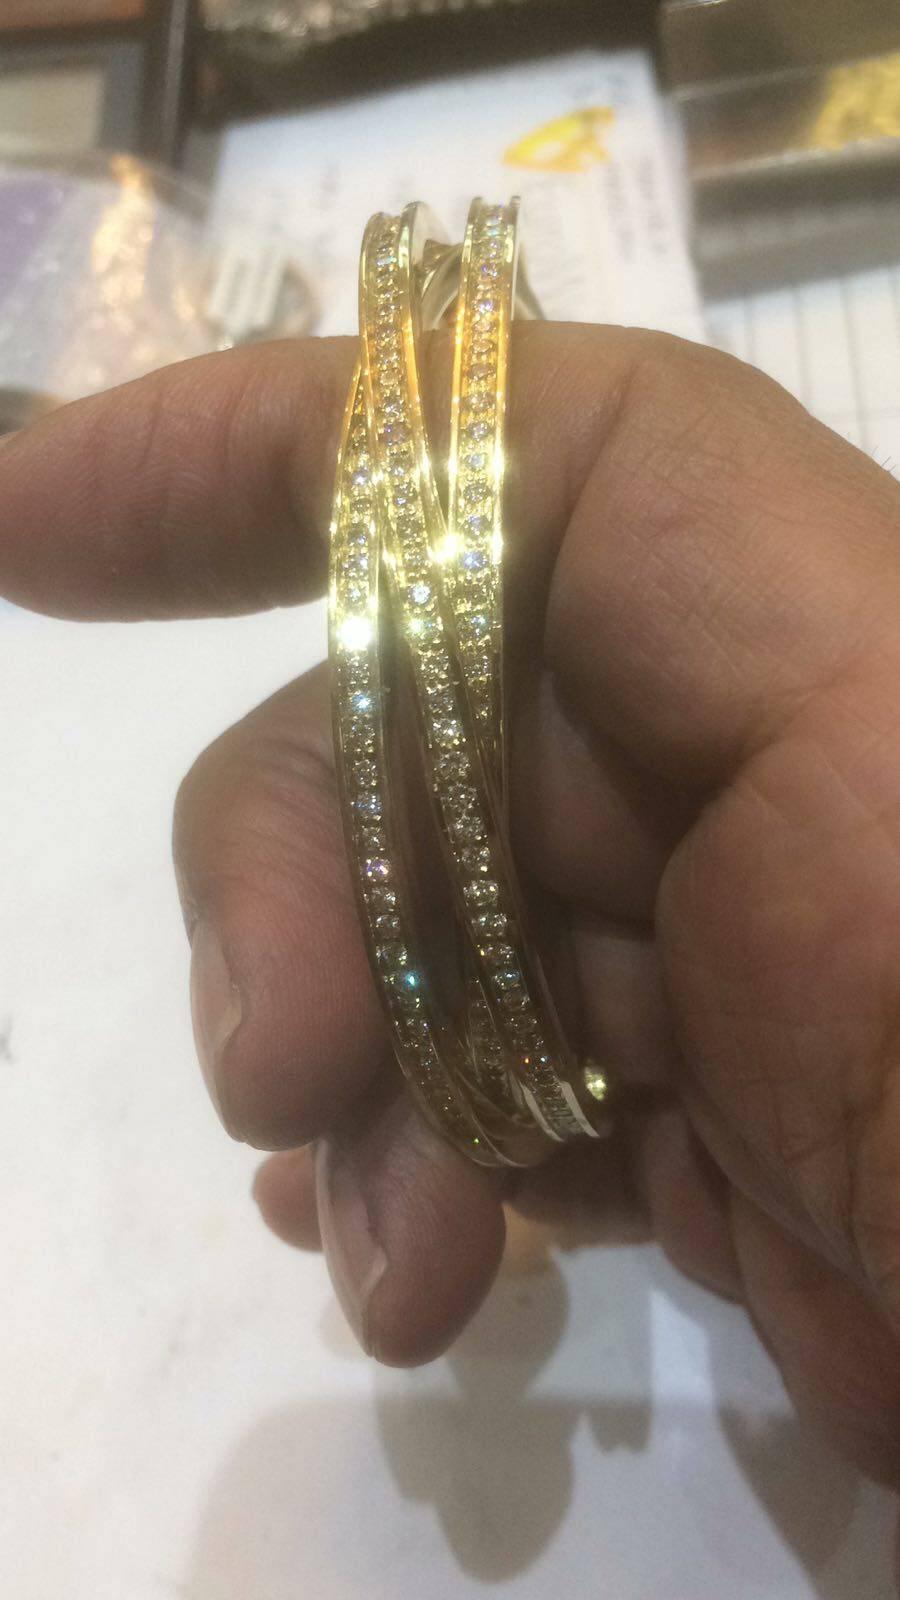 Cartier Classic Trinity Bangle made of 18ct Yellow Gold set with fine diamonds
fully signed by Cartier.Elegant addition to any Ladies jewellery collection.